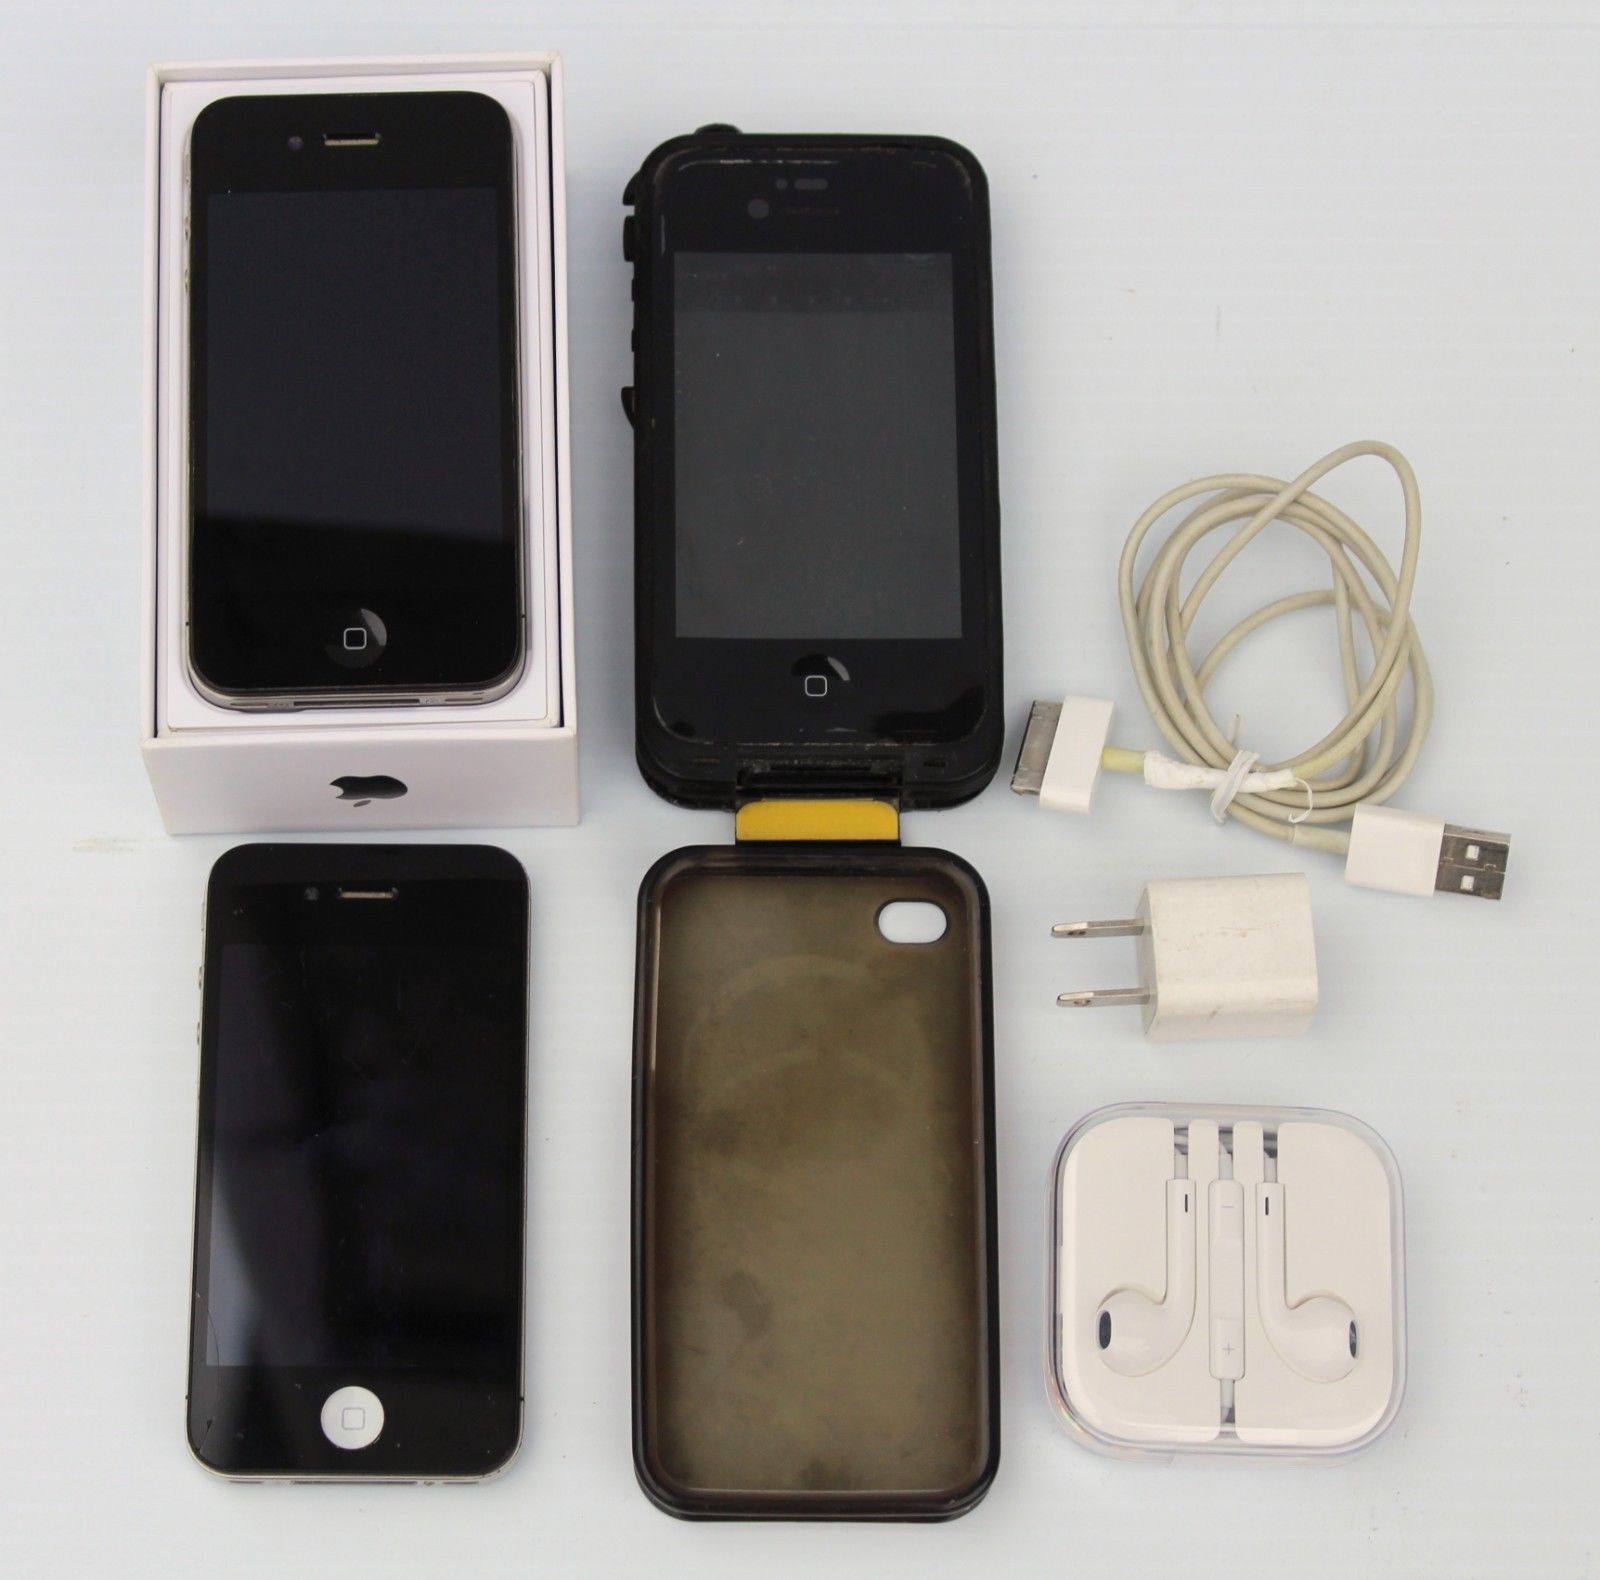 Lot of 2 Apple iPhone 4 - 8GB - Black A1332 (GSM) AT&T w/Accessories & 1 Box - $44.99